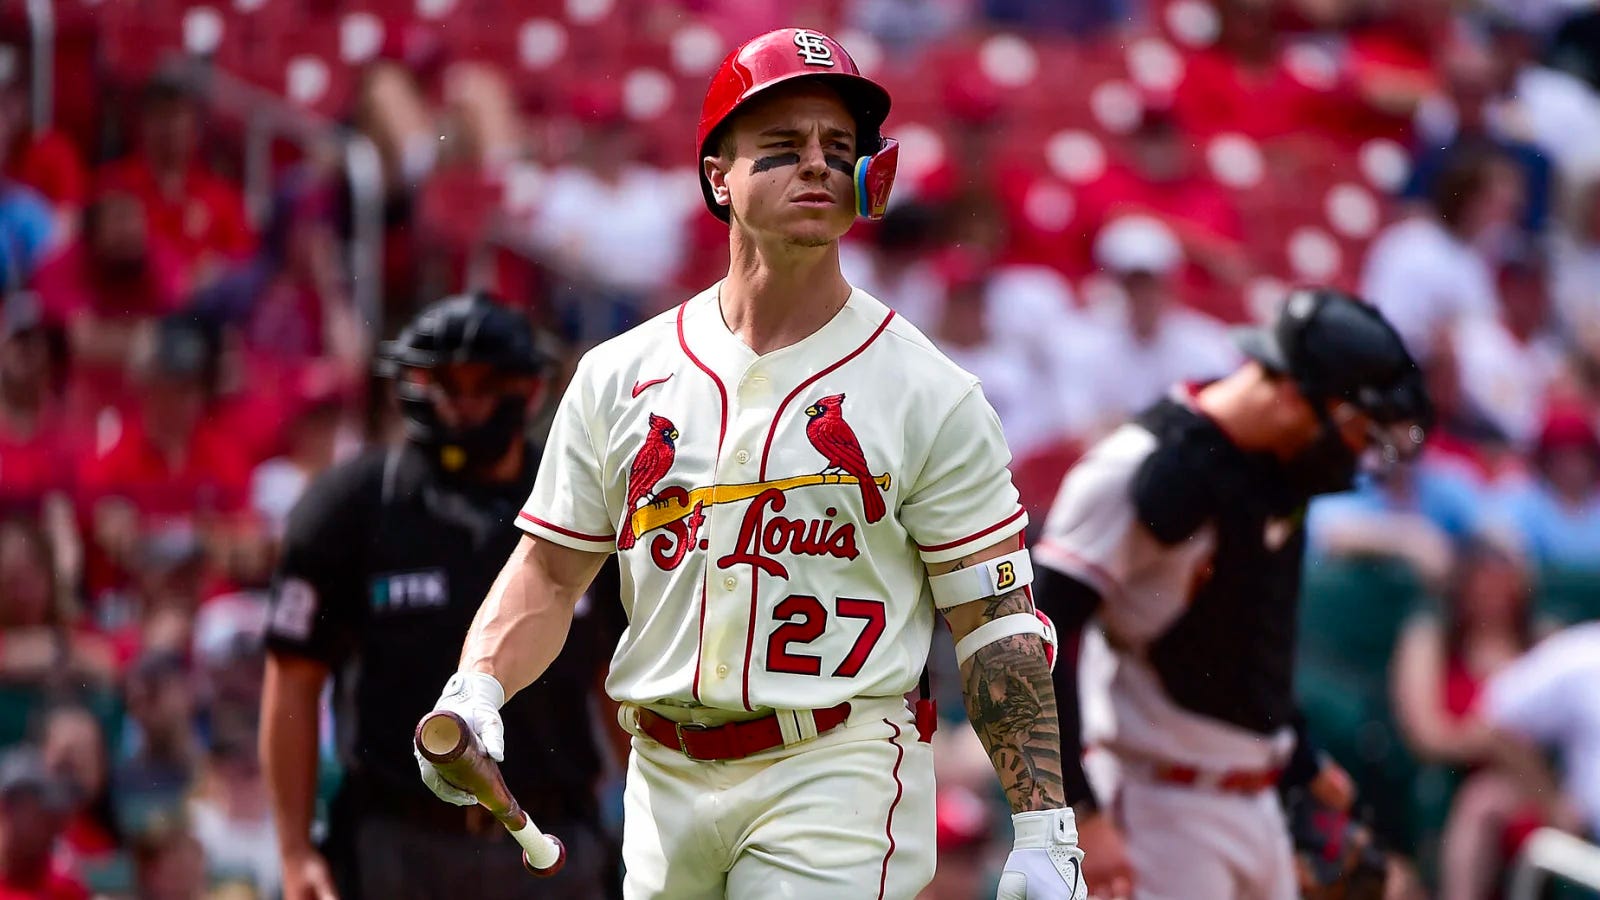 Cardinals: Tyler O'Neill working with training staff this offseason